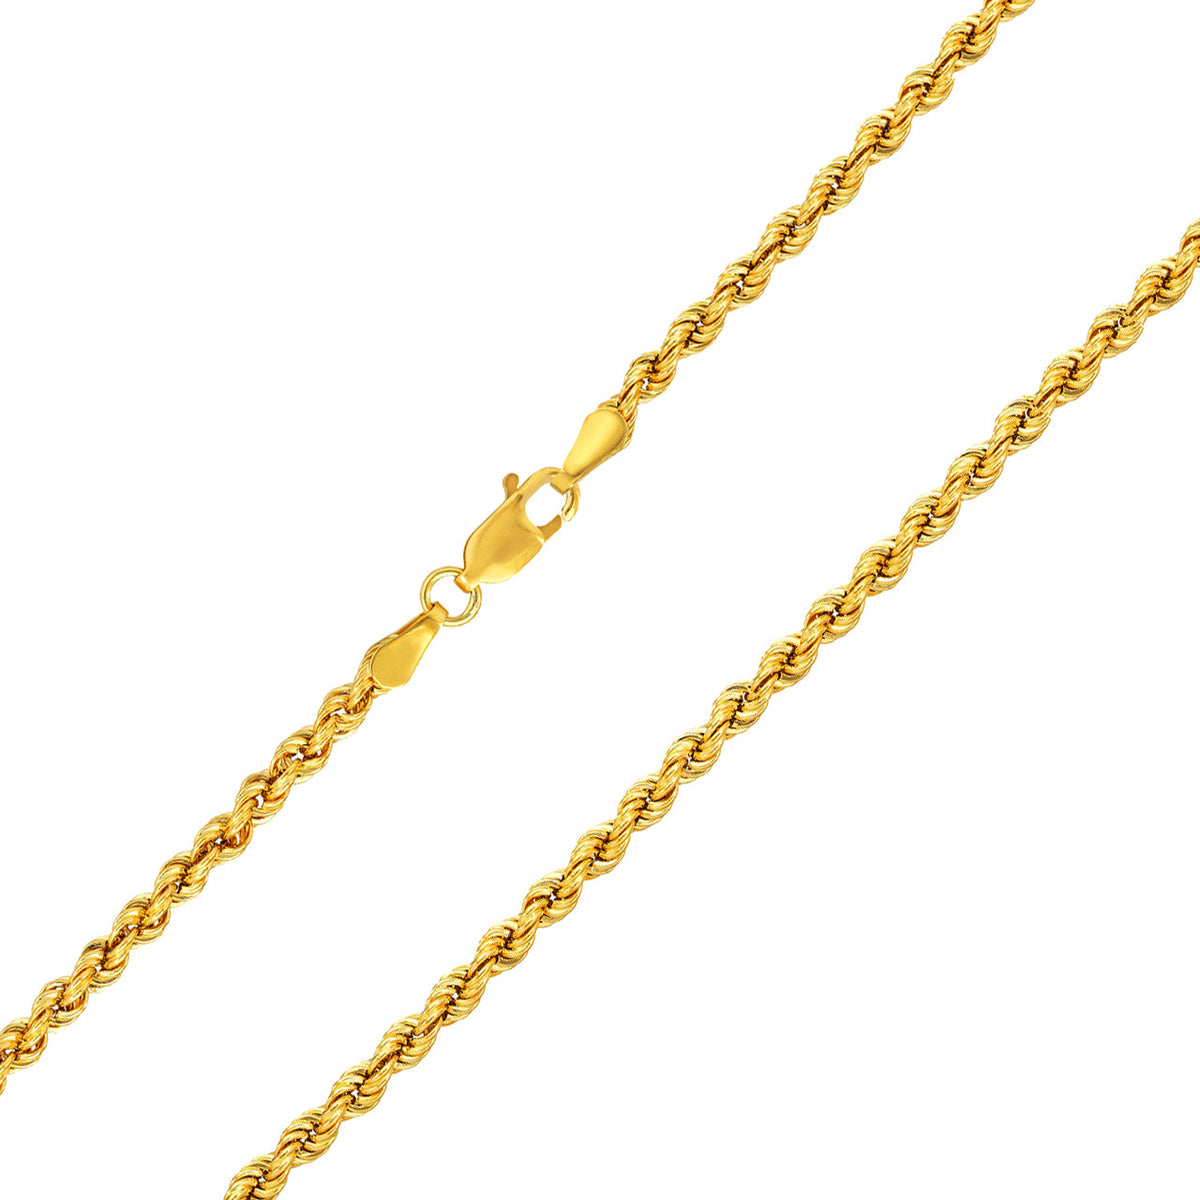 14k Yellow Gold Hollow 4mm Rope Chain Necklace with Lobster Lock - Light Rope Chain with Diamond Cut